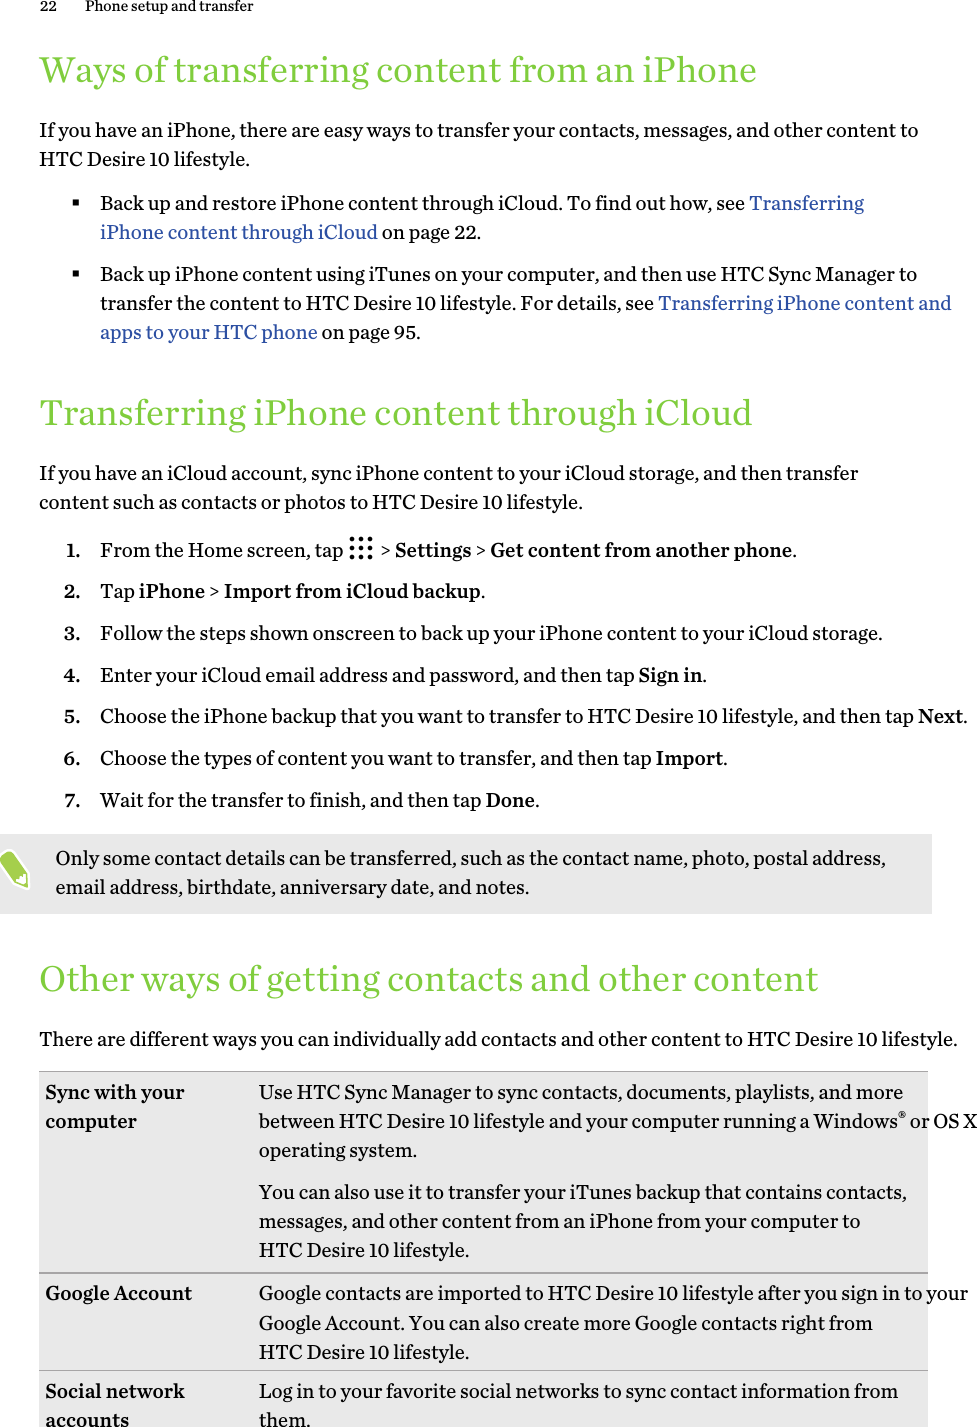 Ways of transferring content from an iPhoneIf you have an iPhone, there are easy ways to transfer your contacts, messages, and other content to HTC Desire 10 lifestyle. §Back up and restore iPhone content through iCloud. To find out how, see Transferring iPhone content through iCloud on page 22.§Back up iPhone content using iTunes on your computer, and then use HTC Sync Manager to transfer the content to HTC Desire 10 lifestyle. For details, see Transferring iPhone content and apps to your HTC phone on page 95.Transferring iPhone content through iCloudIf you have an iCloud account, sync iPhone content to your iCloud storage, and then transfer content such as contacts or photos to HTC Desire 10 lifestyle. 1. From the Home screen, tap   &gt; Settings &gt; Get content from another phone.2. Tap iPhone &gt; Import from iCloud backup.3. Follow the steps shown onscreen to back up your iPhone content to your iCloud storage.4. Enter your iCloud email address and password, and then tap Sign in.5. Choose the iPhone backup that you want to transfer to HTC Desire 10 lifestyle, and then tap Next.6. Choose the types of content you want to transfer, and then tap Import.7. Wait for the transfer to finish, and then tap Done.Only some contact details can be transferred, such as the contact name, photo, postal address, email address, birthdate, anniversary date, and notes.Other ways of getting contacts and other contentThere are different ways you can individually add contacts and other content to HTC Desire 10 lifestyle. Sync with your computer Use HTC Sync Manager to sync contacts, documents, playlists, and more between HTC Desire 10 lifestyle and your computer running a Windows® or OS X operating system.You can also use it to transfer your iTunes backup that contains contacts, messages, and other content from an iPhone from your computer to HTC Desire 10 lifestyle.Google Account Google contacts are imported to HTC Desire 10 lifestyle after you sign in to your Google Account. You can also create more Google contacts right from HTC Desire 10 lifestyle.Social network accounts Log in to your favorite social networks to sync contact information from them.22 Phone setup and transfer